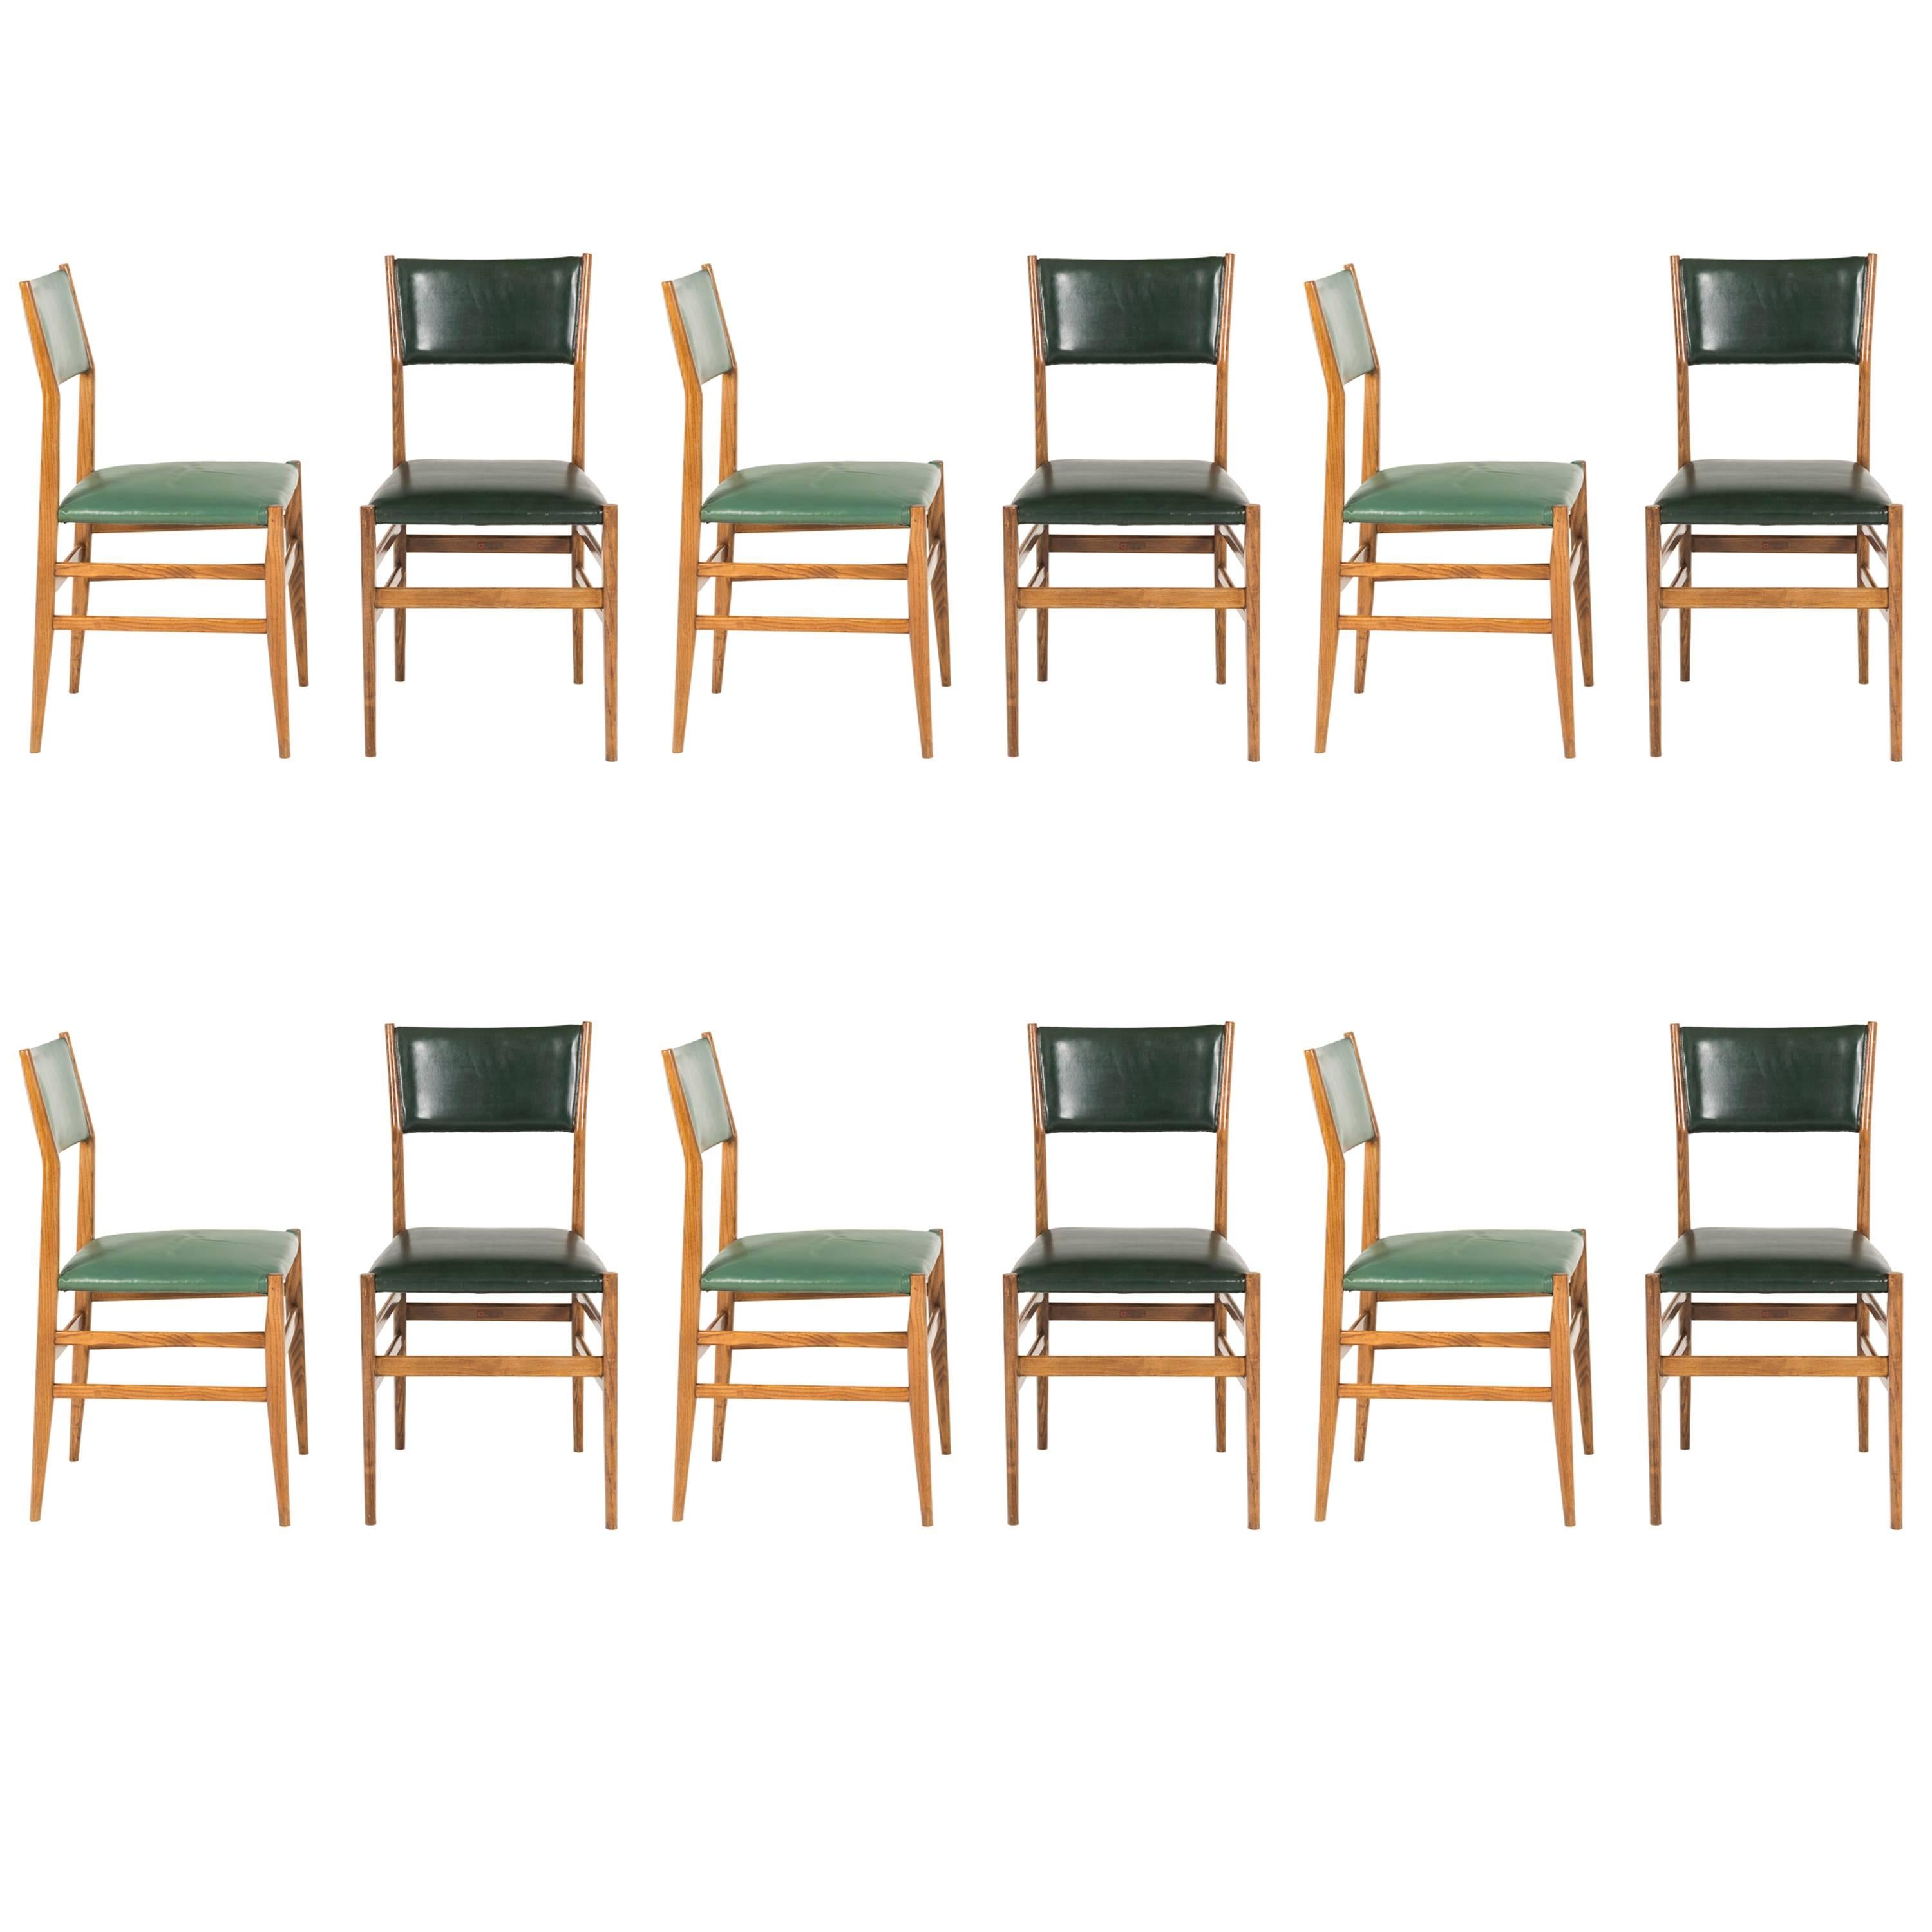 12 Vintage Italian Leggere Chairs in Ashtree Wood by Gio Ponti, circa 1954 For Sale